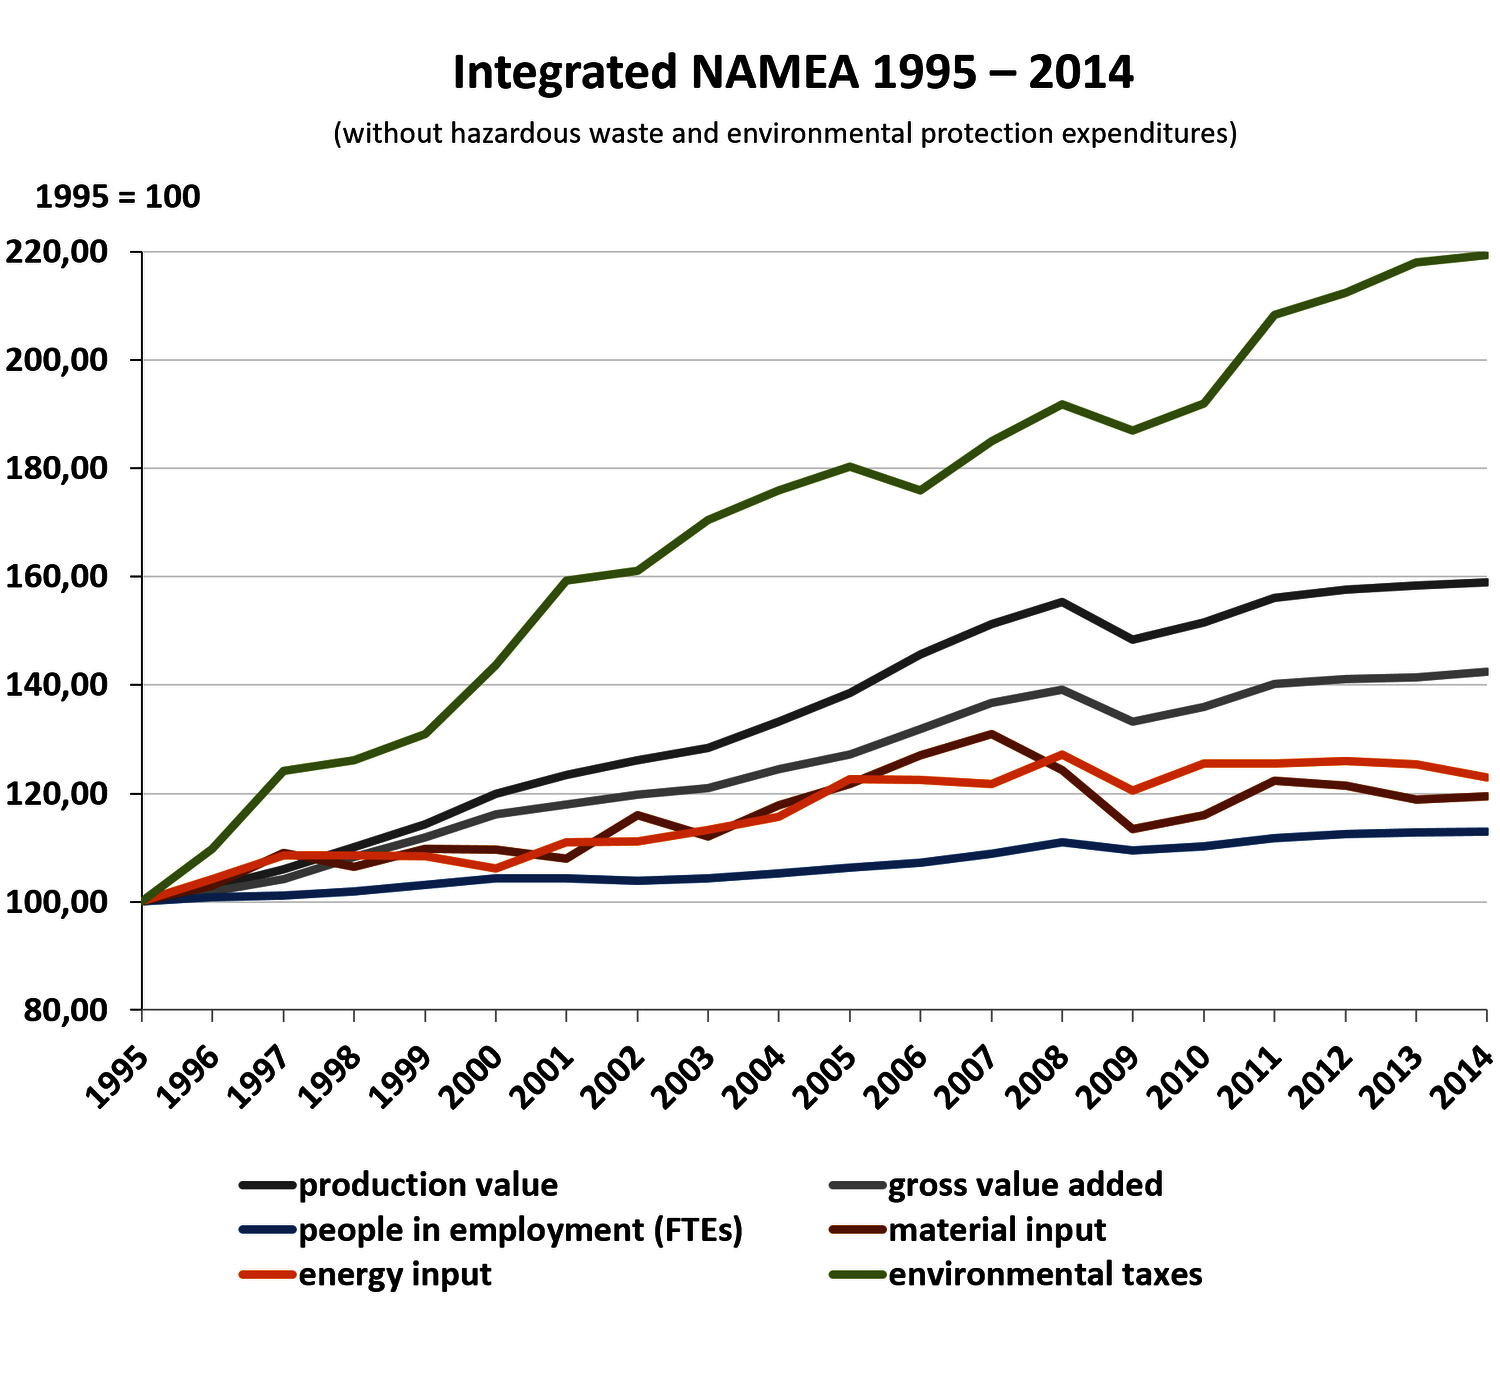 Figure with data from the Integrated NAMEA in Austria form 1995 to 2014